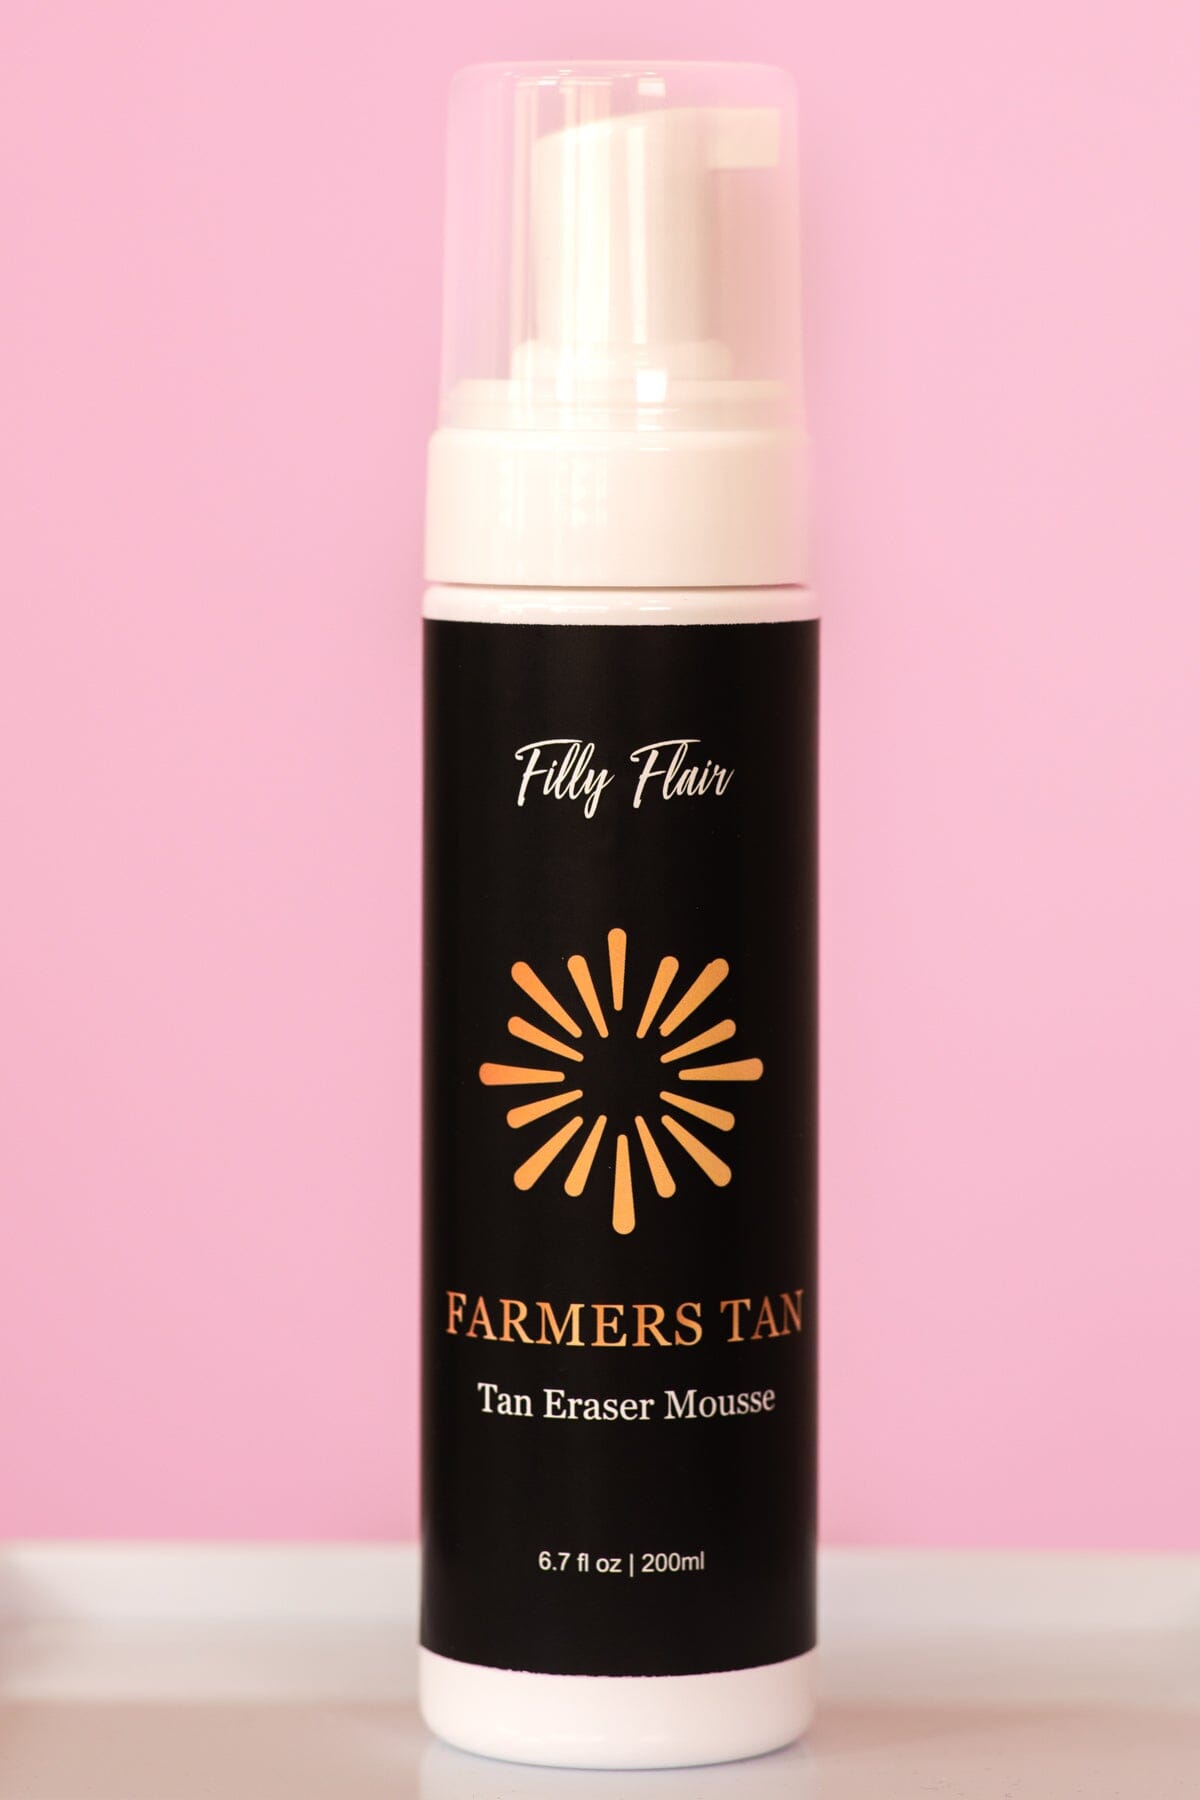 Farmers Tan Eraser Mousse by Filly Flair - Filly Flair